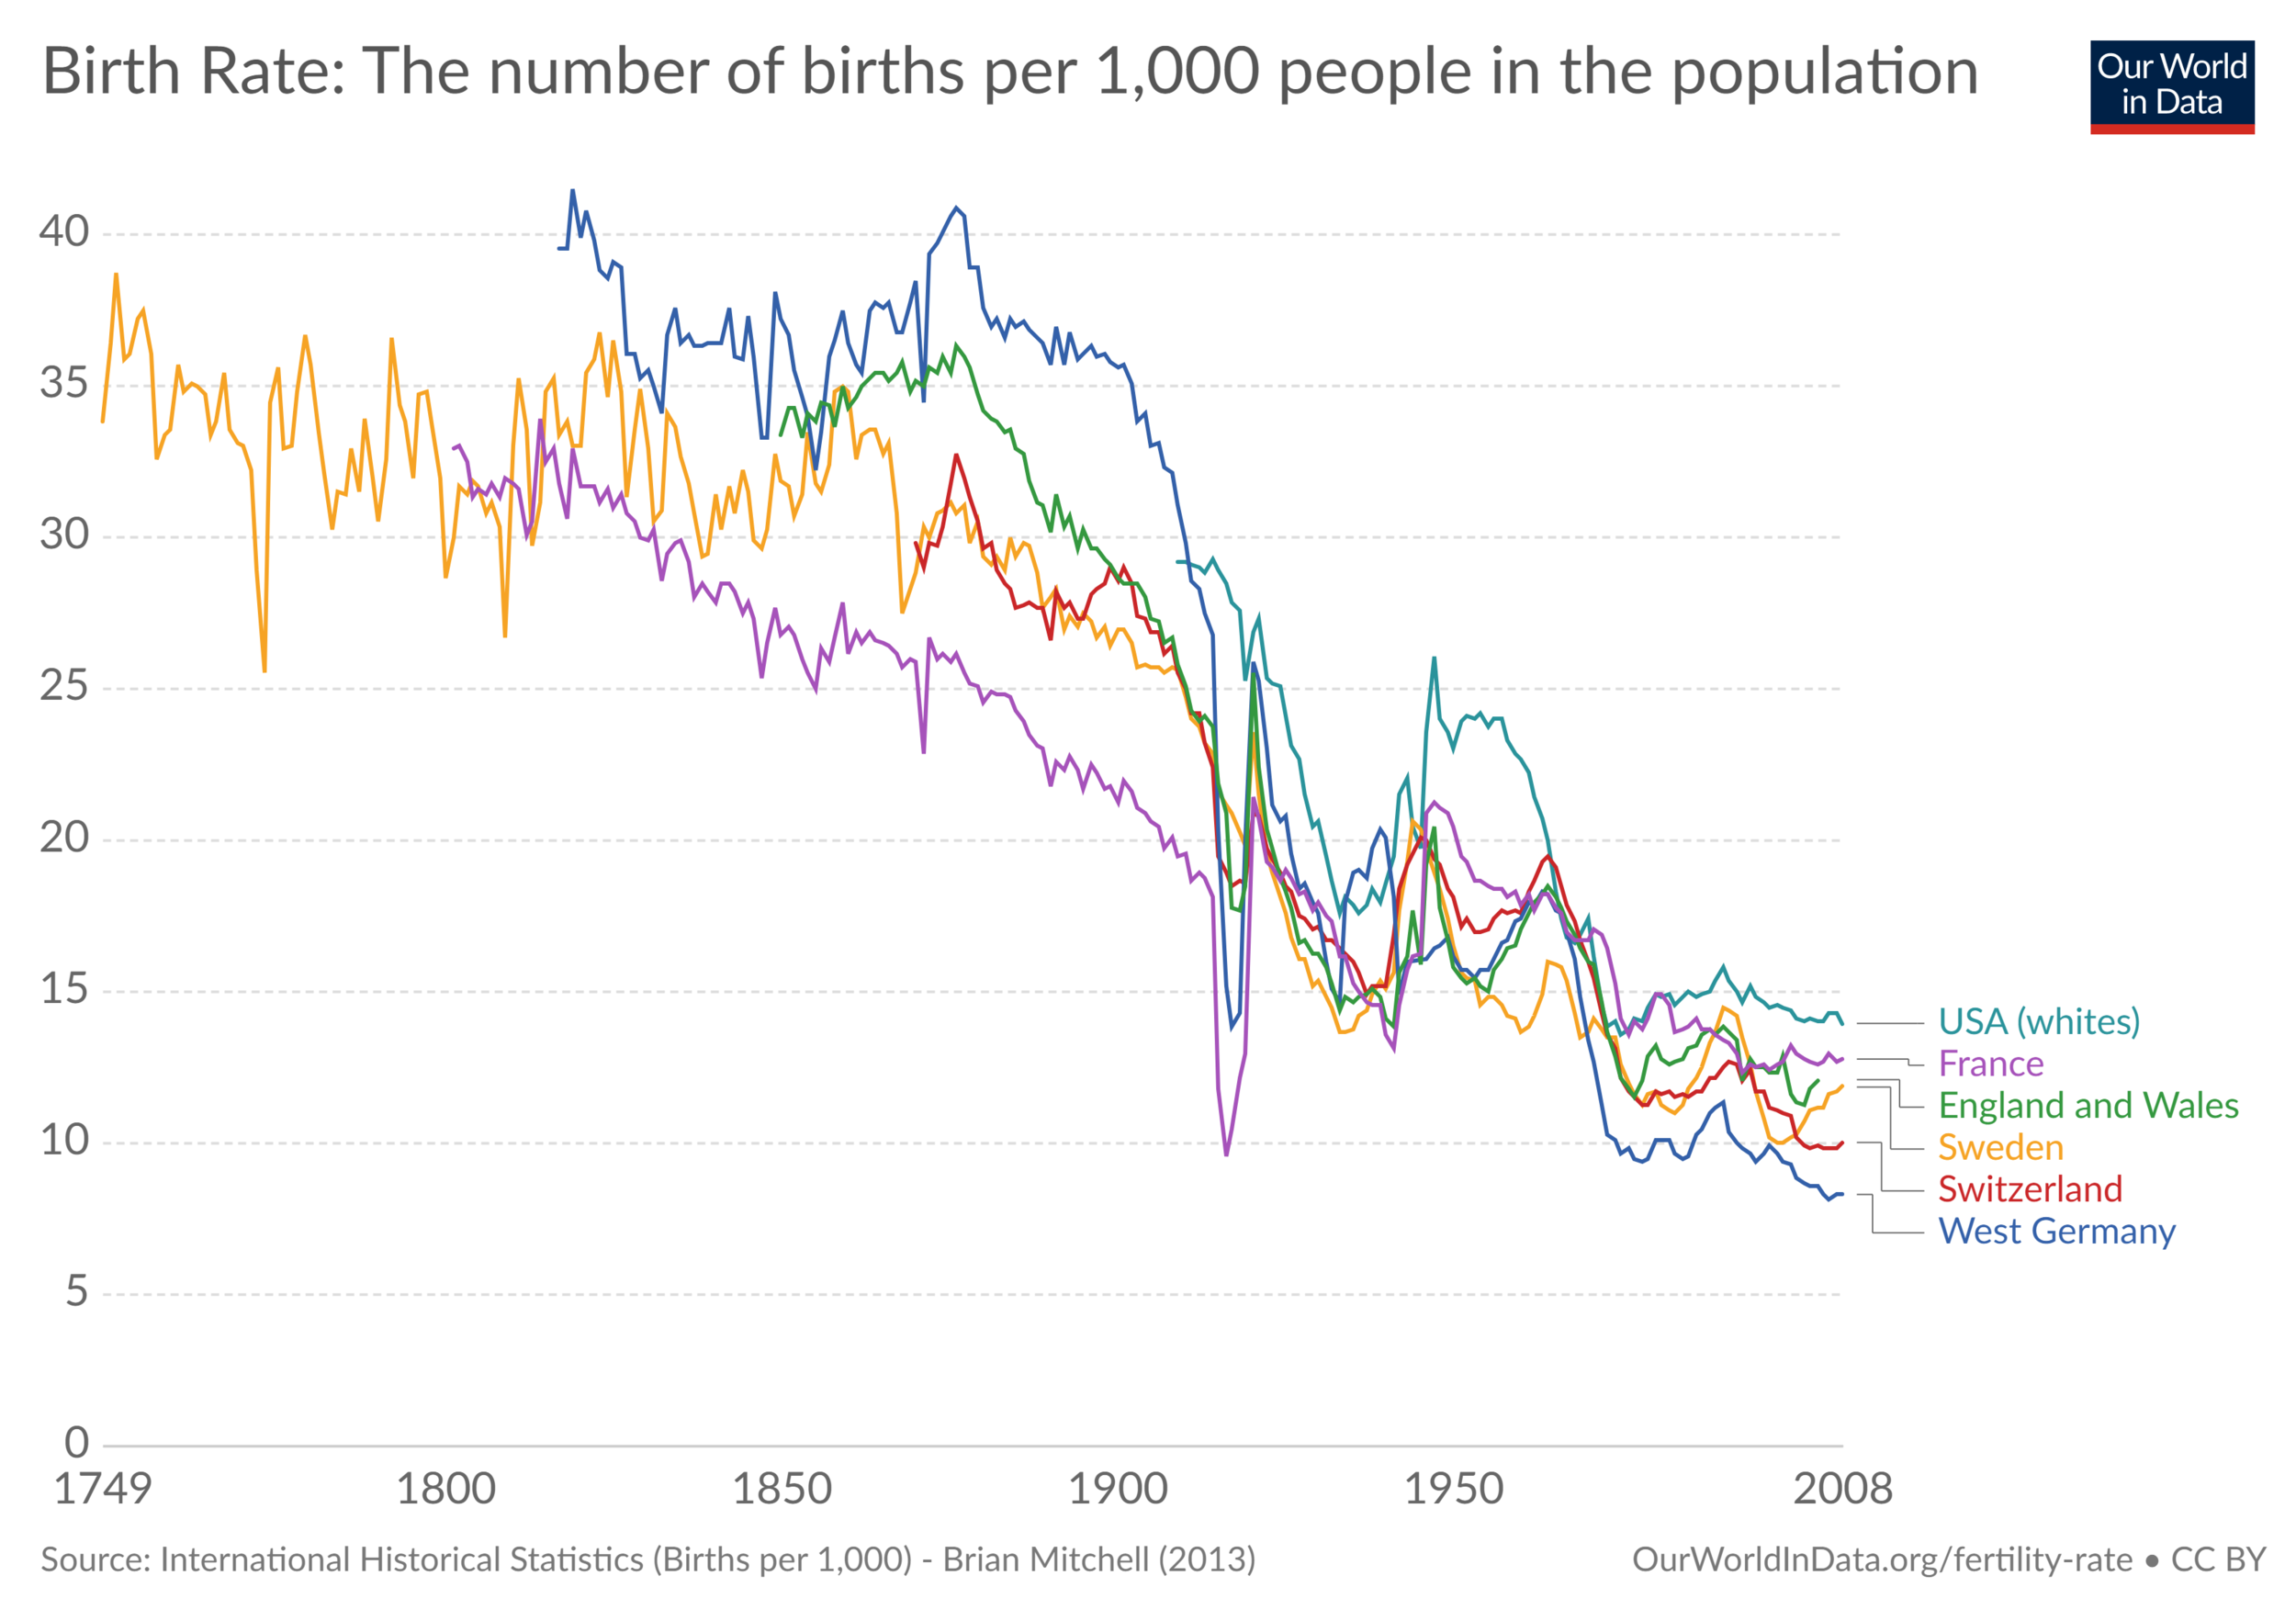 birth-rate-the-number-of-births-per-1000-people-in-the-population (1).png